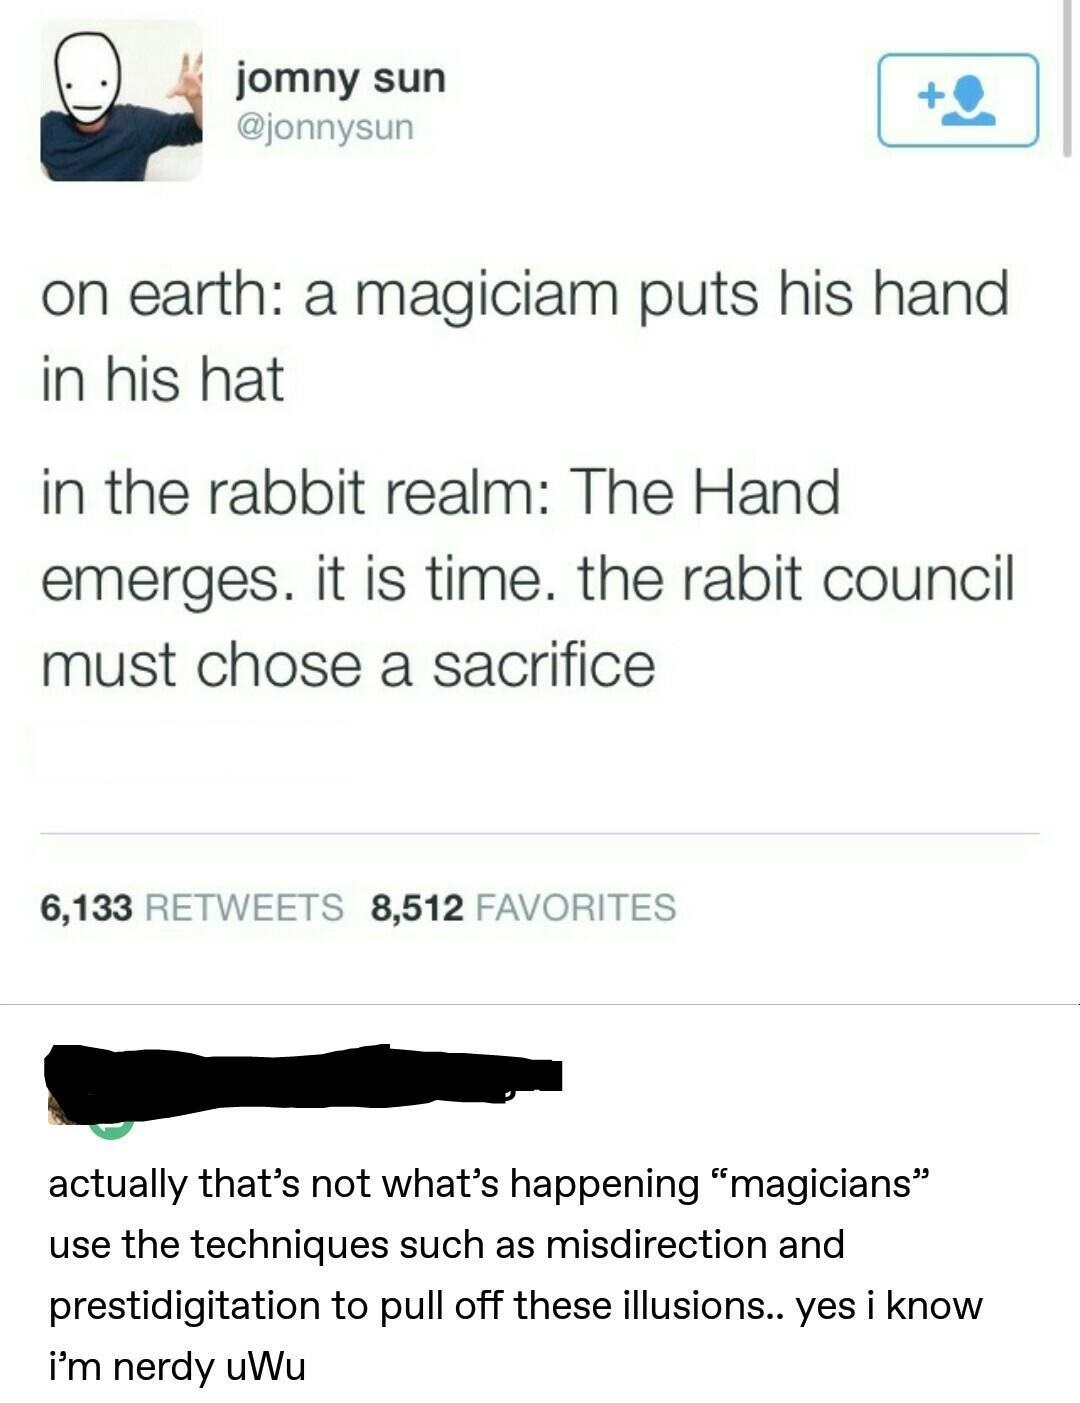 yes i know i am nerdy uwu - jomny sun on earth a magiciam puts his hand in his hat in the rabbit realm The Hand emerges. It is time. the rabit council must chose a sacrifice 6,133 8,512 Favorites actually that's not what's happening "magicians use the tec